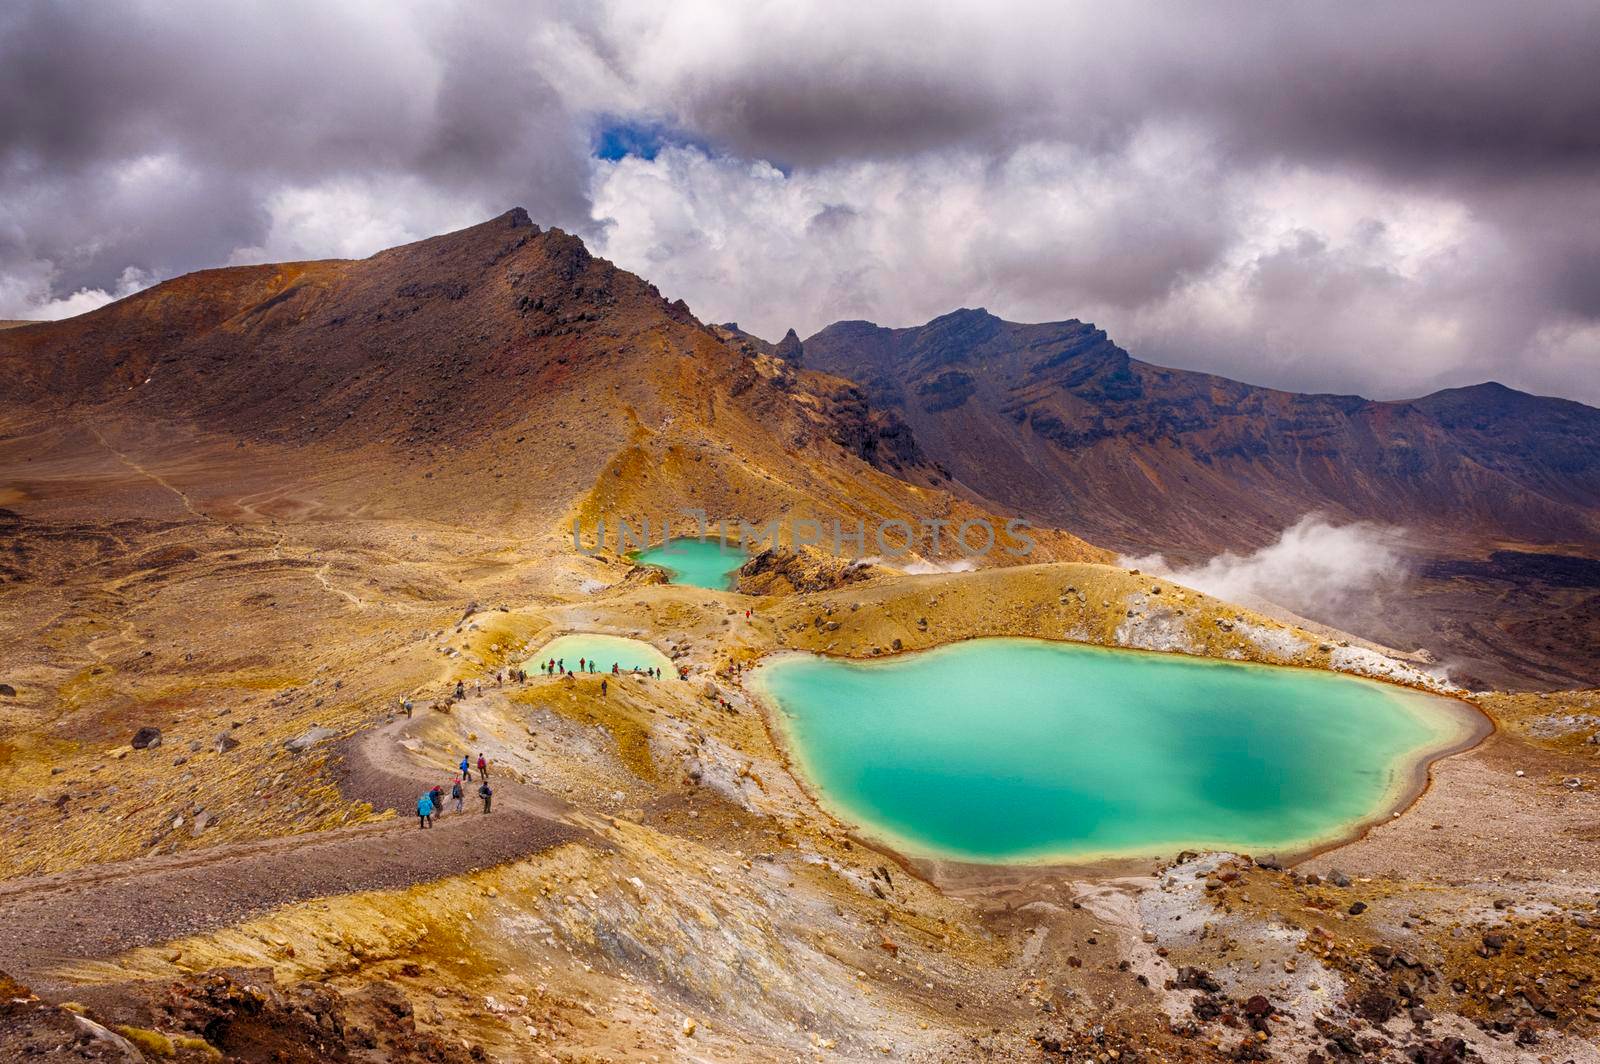 Tongariro Crossing park in the New Zealand by fyletto